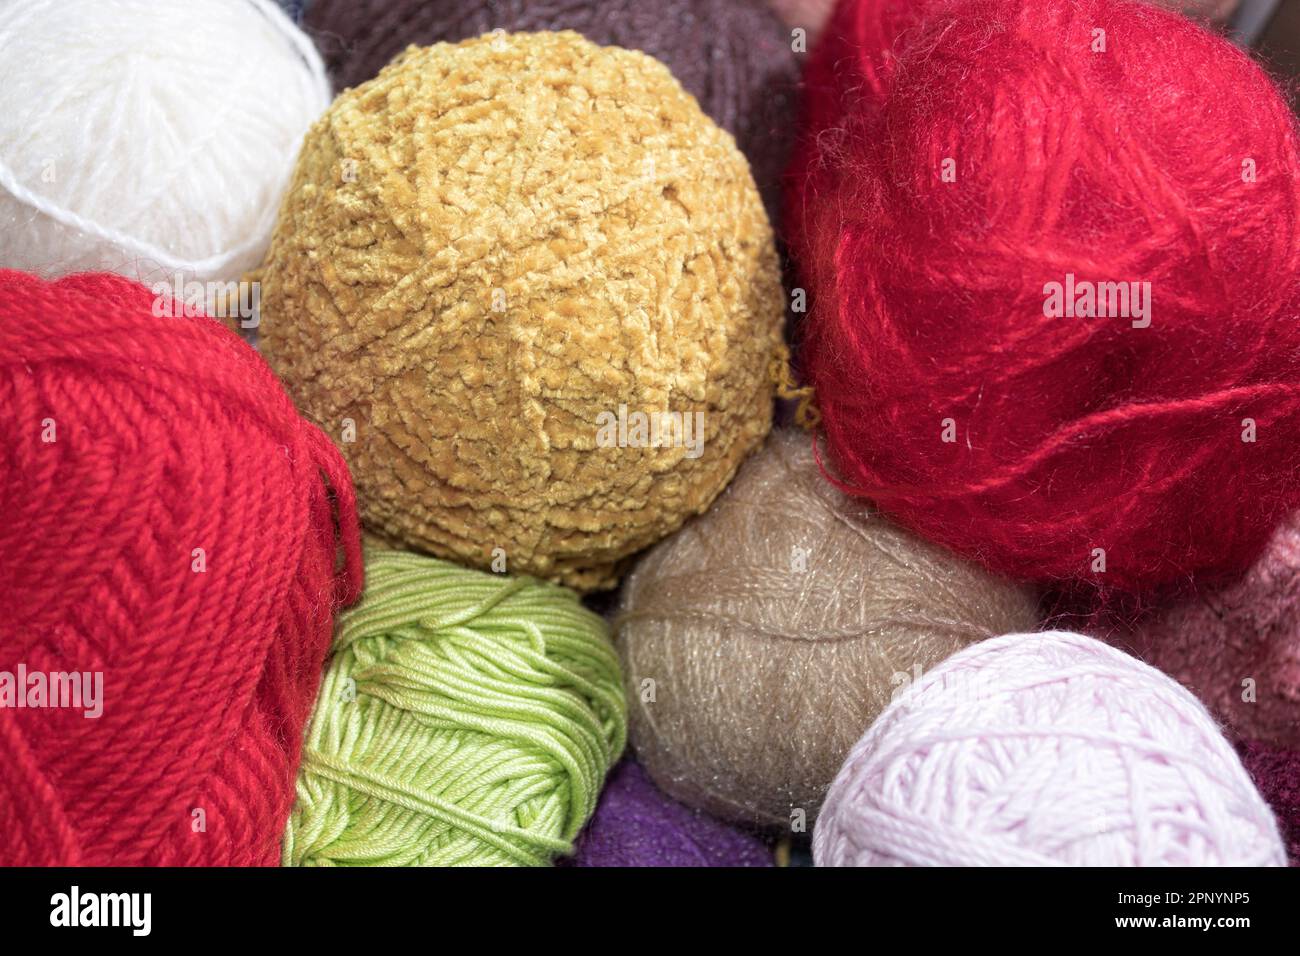 https://c8.alamy.com/comp/2PNYNP5/multi-colored-balls-of-knitting-threads-balls-of-colored-yarn-woolen-yarn-in-balls-different-colors-2PNYNP5.jpg